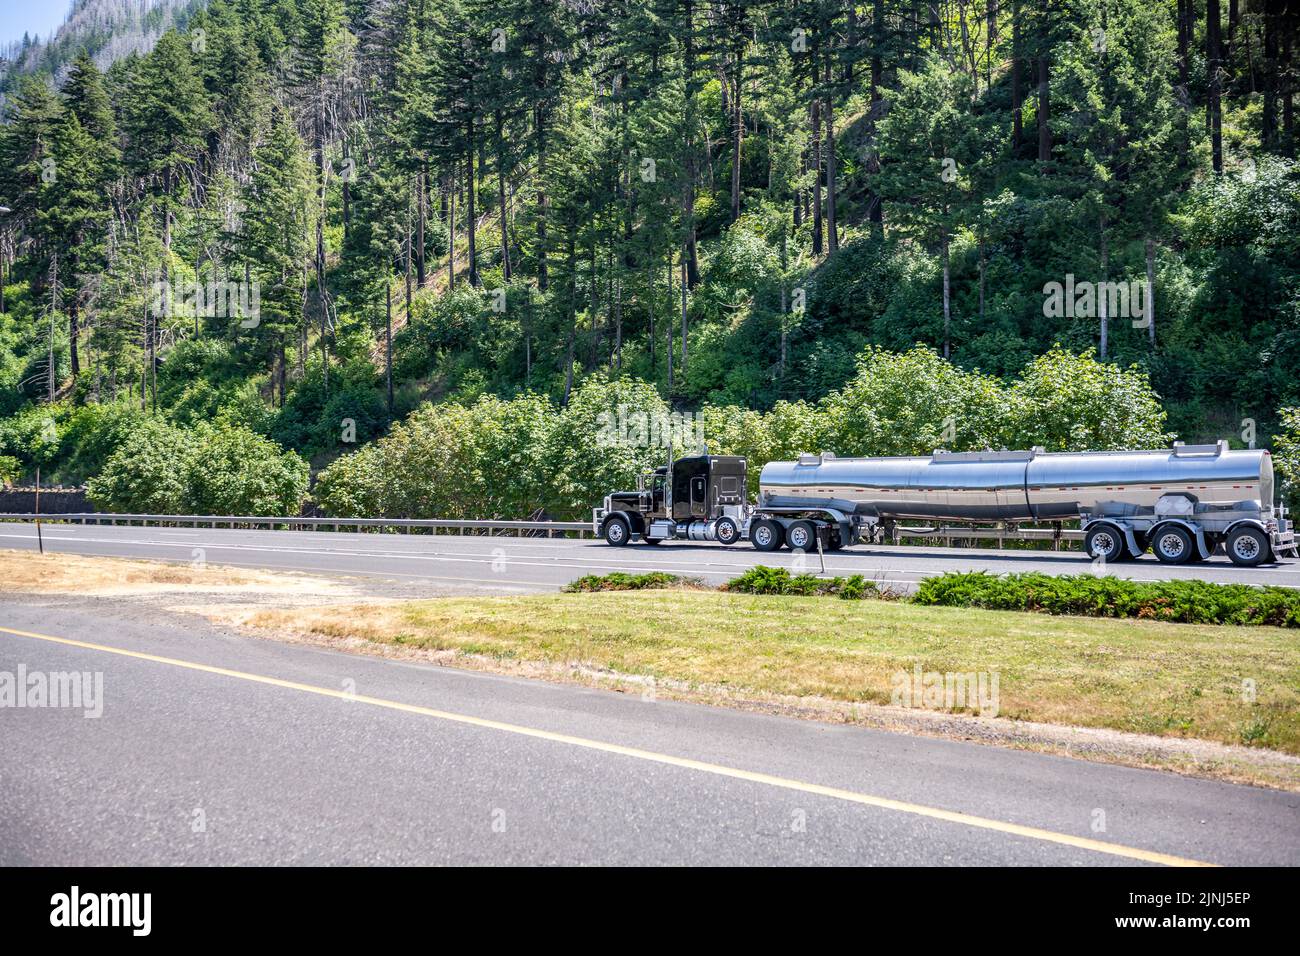 Industrial standard black classic shiny powerful big  rig semi truck tractor transporting liquid cargo in stainless steel tank semi trailer running on Stock Photo